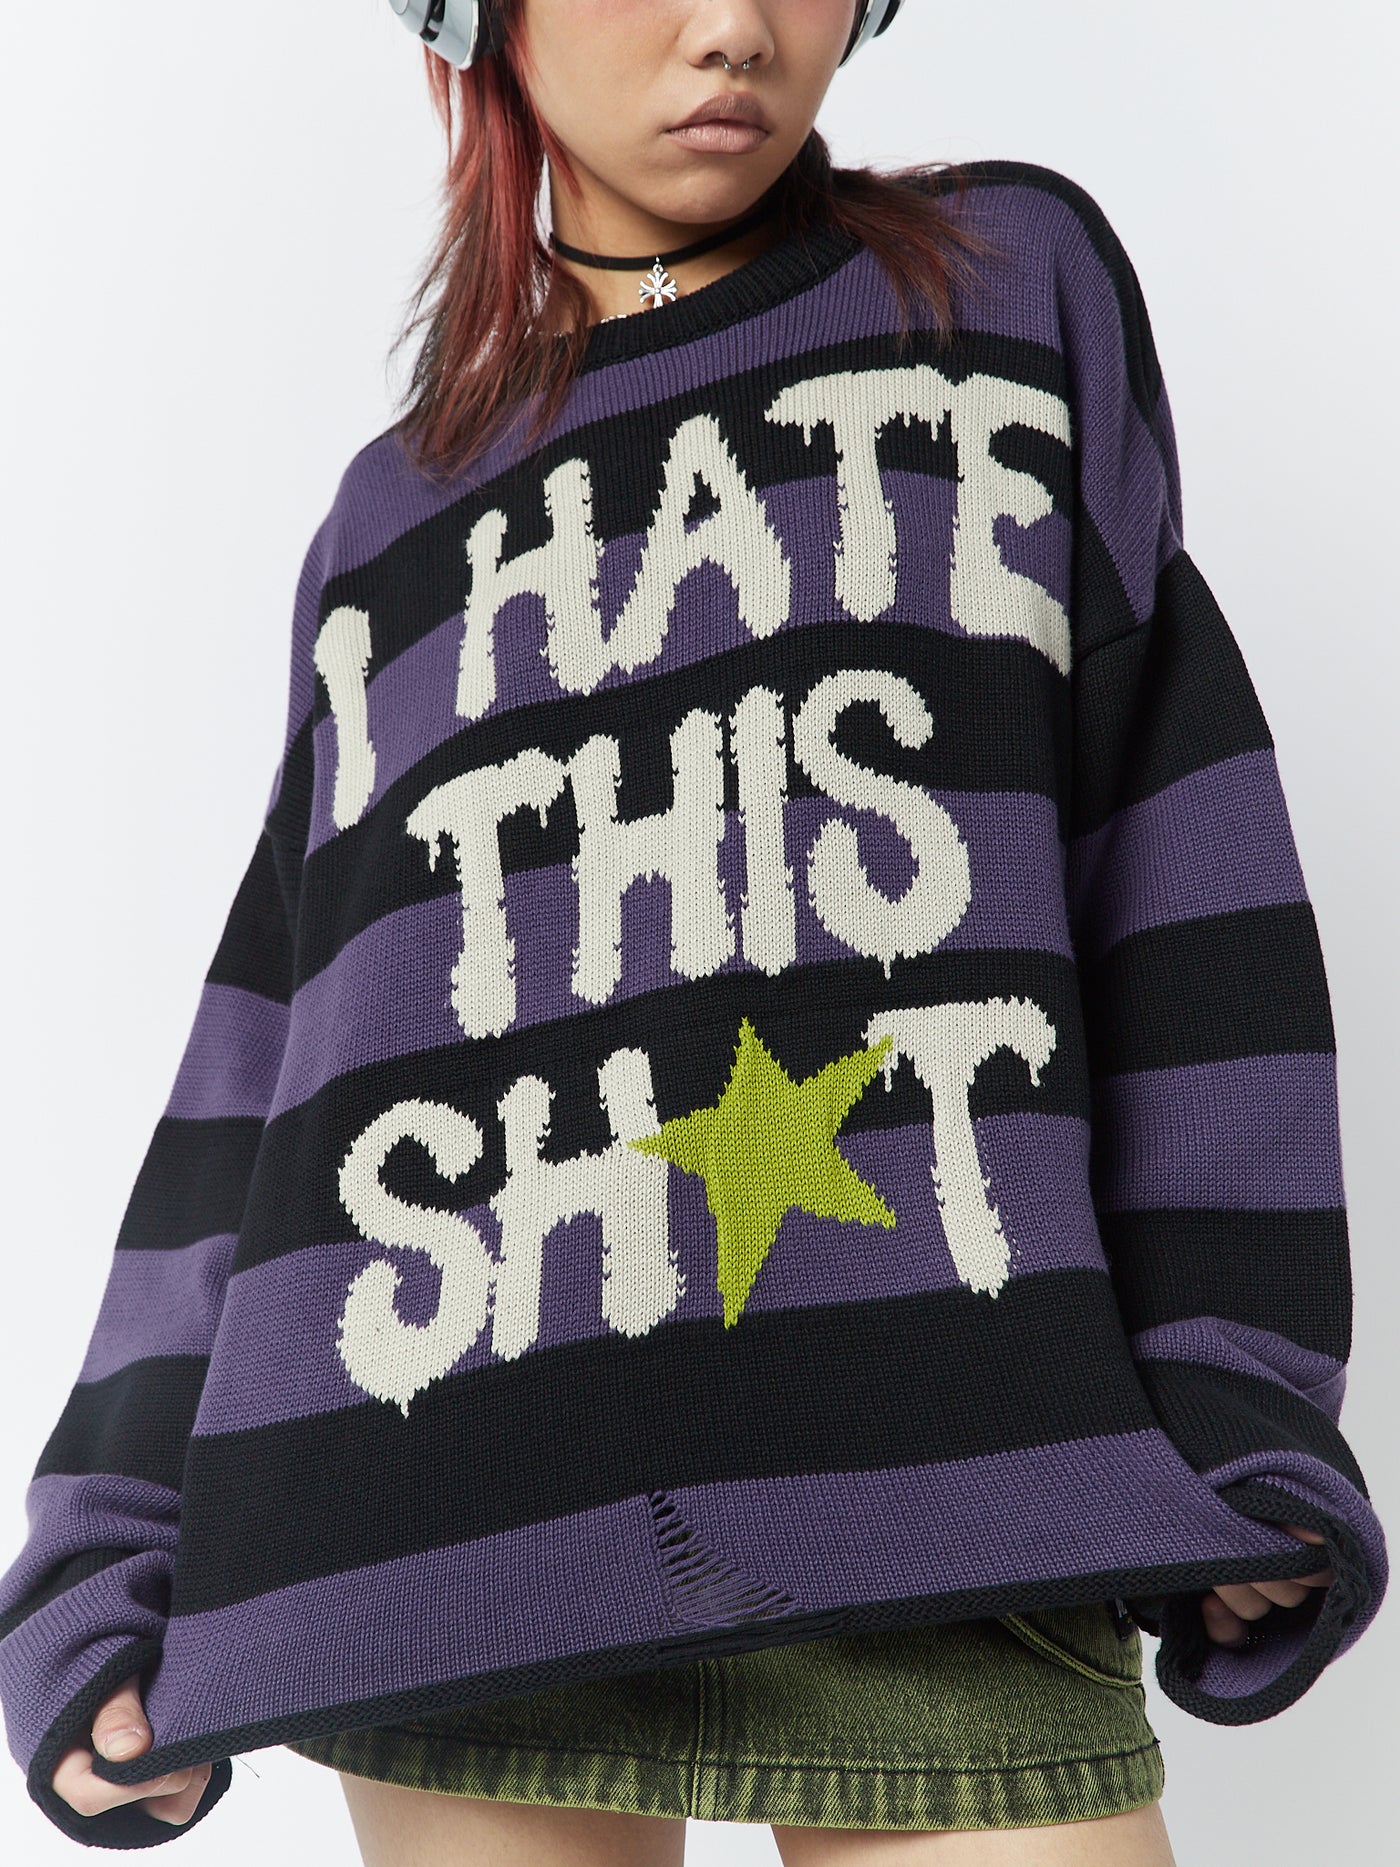 A striped jumper with the graphic "I Hate This Sh*t" by Minga London. This jumper combines a bold and rebellious design with trendy stripes, making a statement and adding a touch of attitude to your outfit.